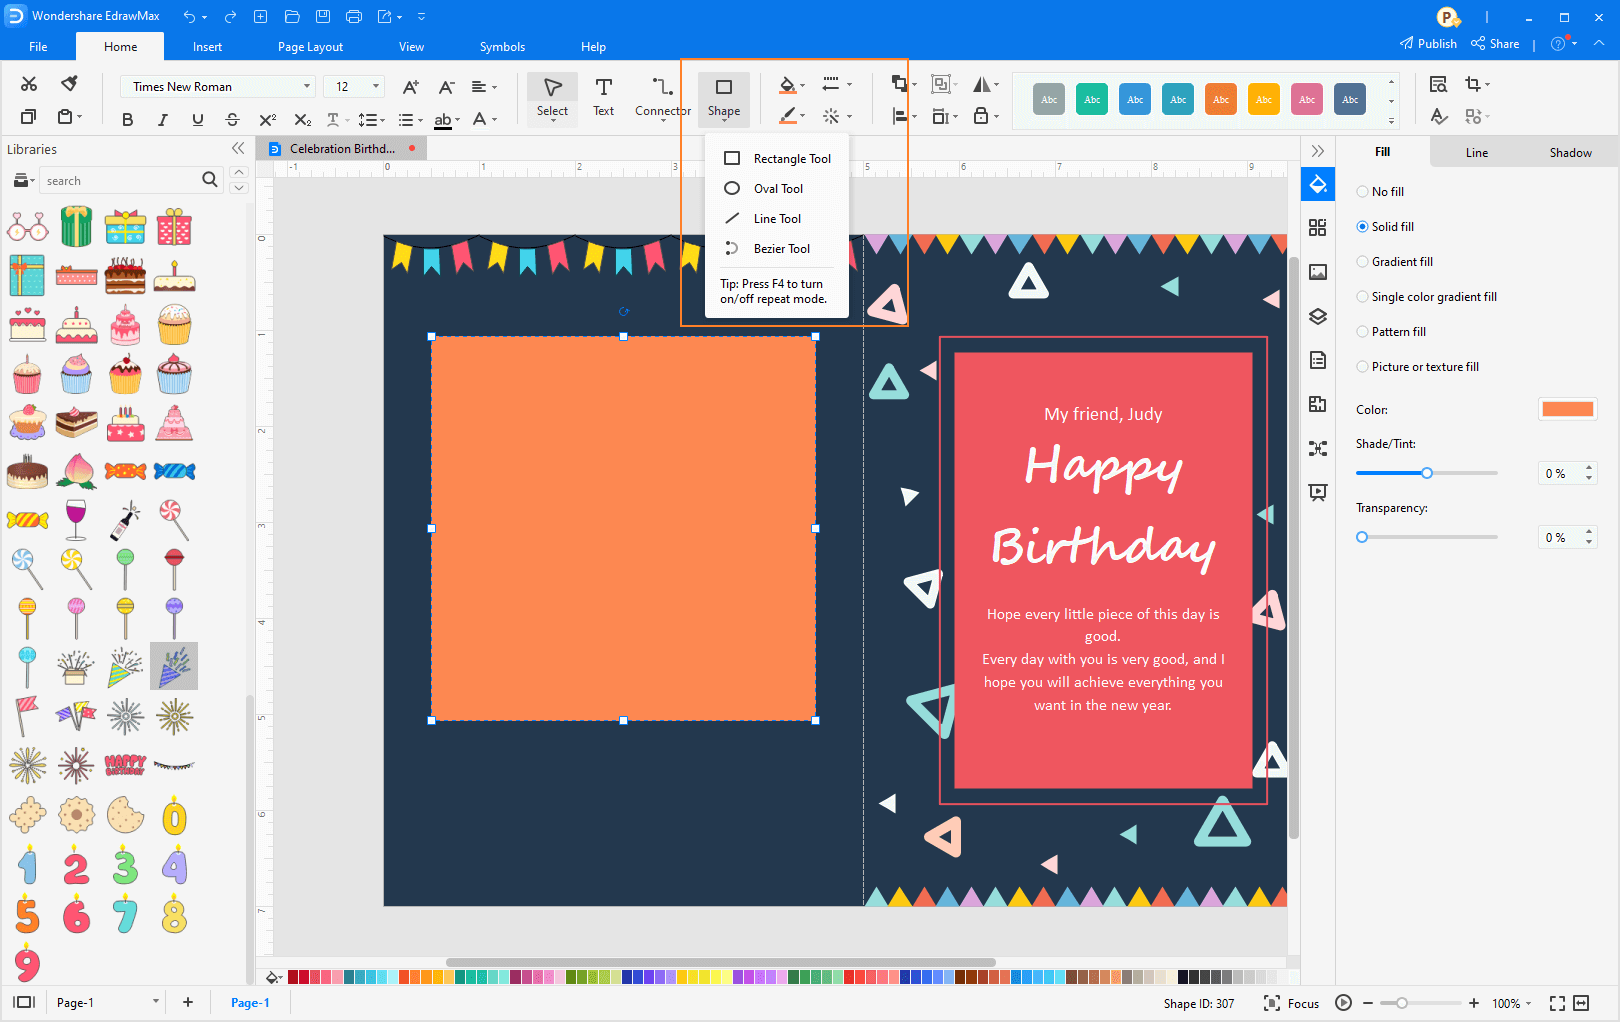 Enrich the card background